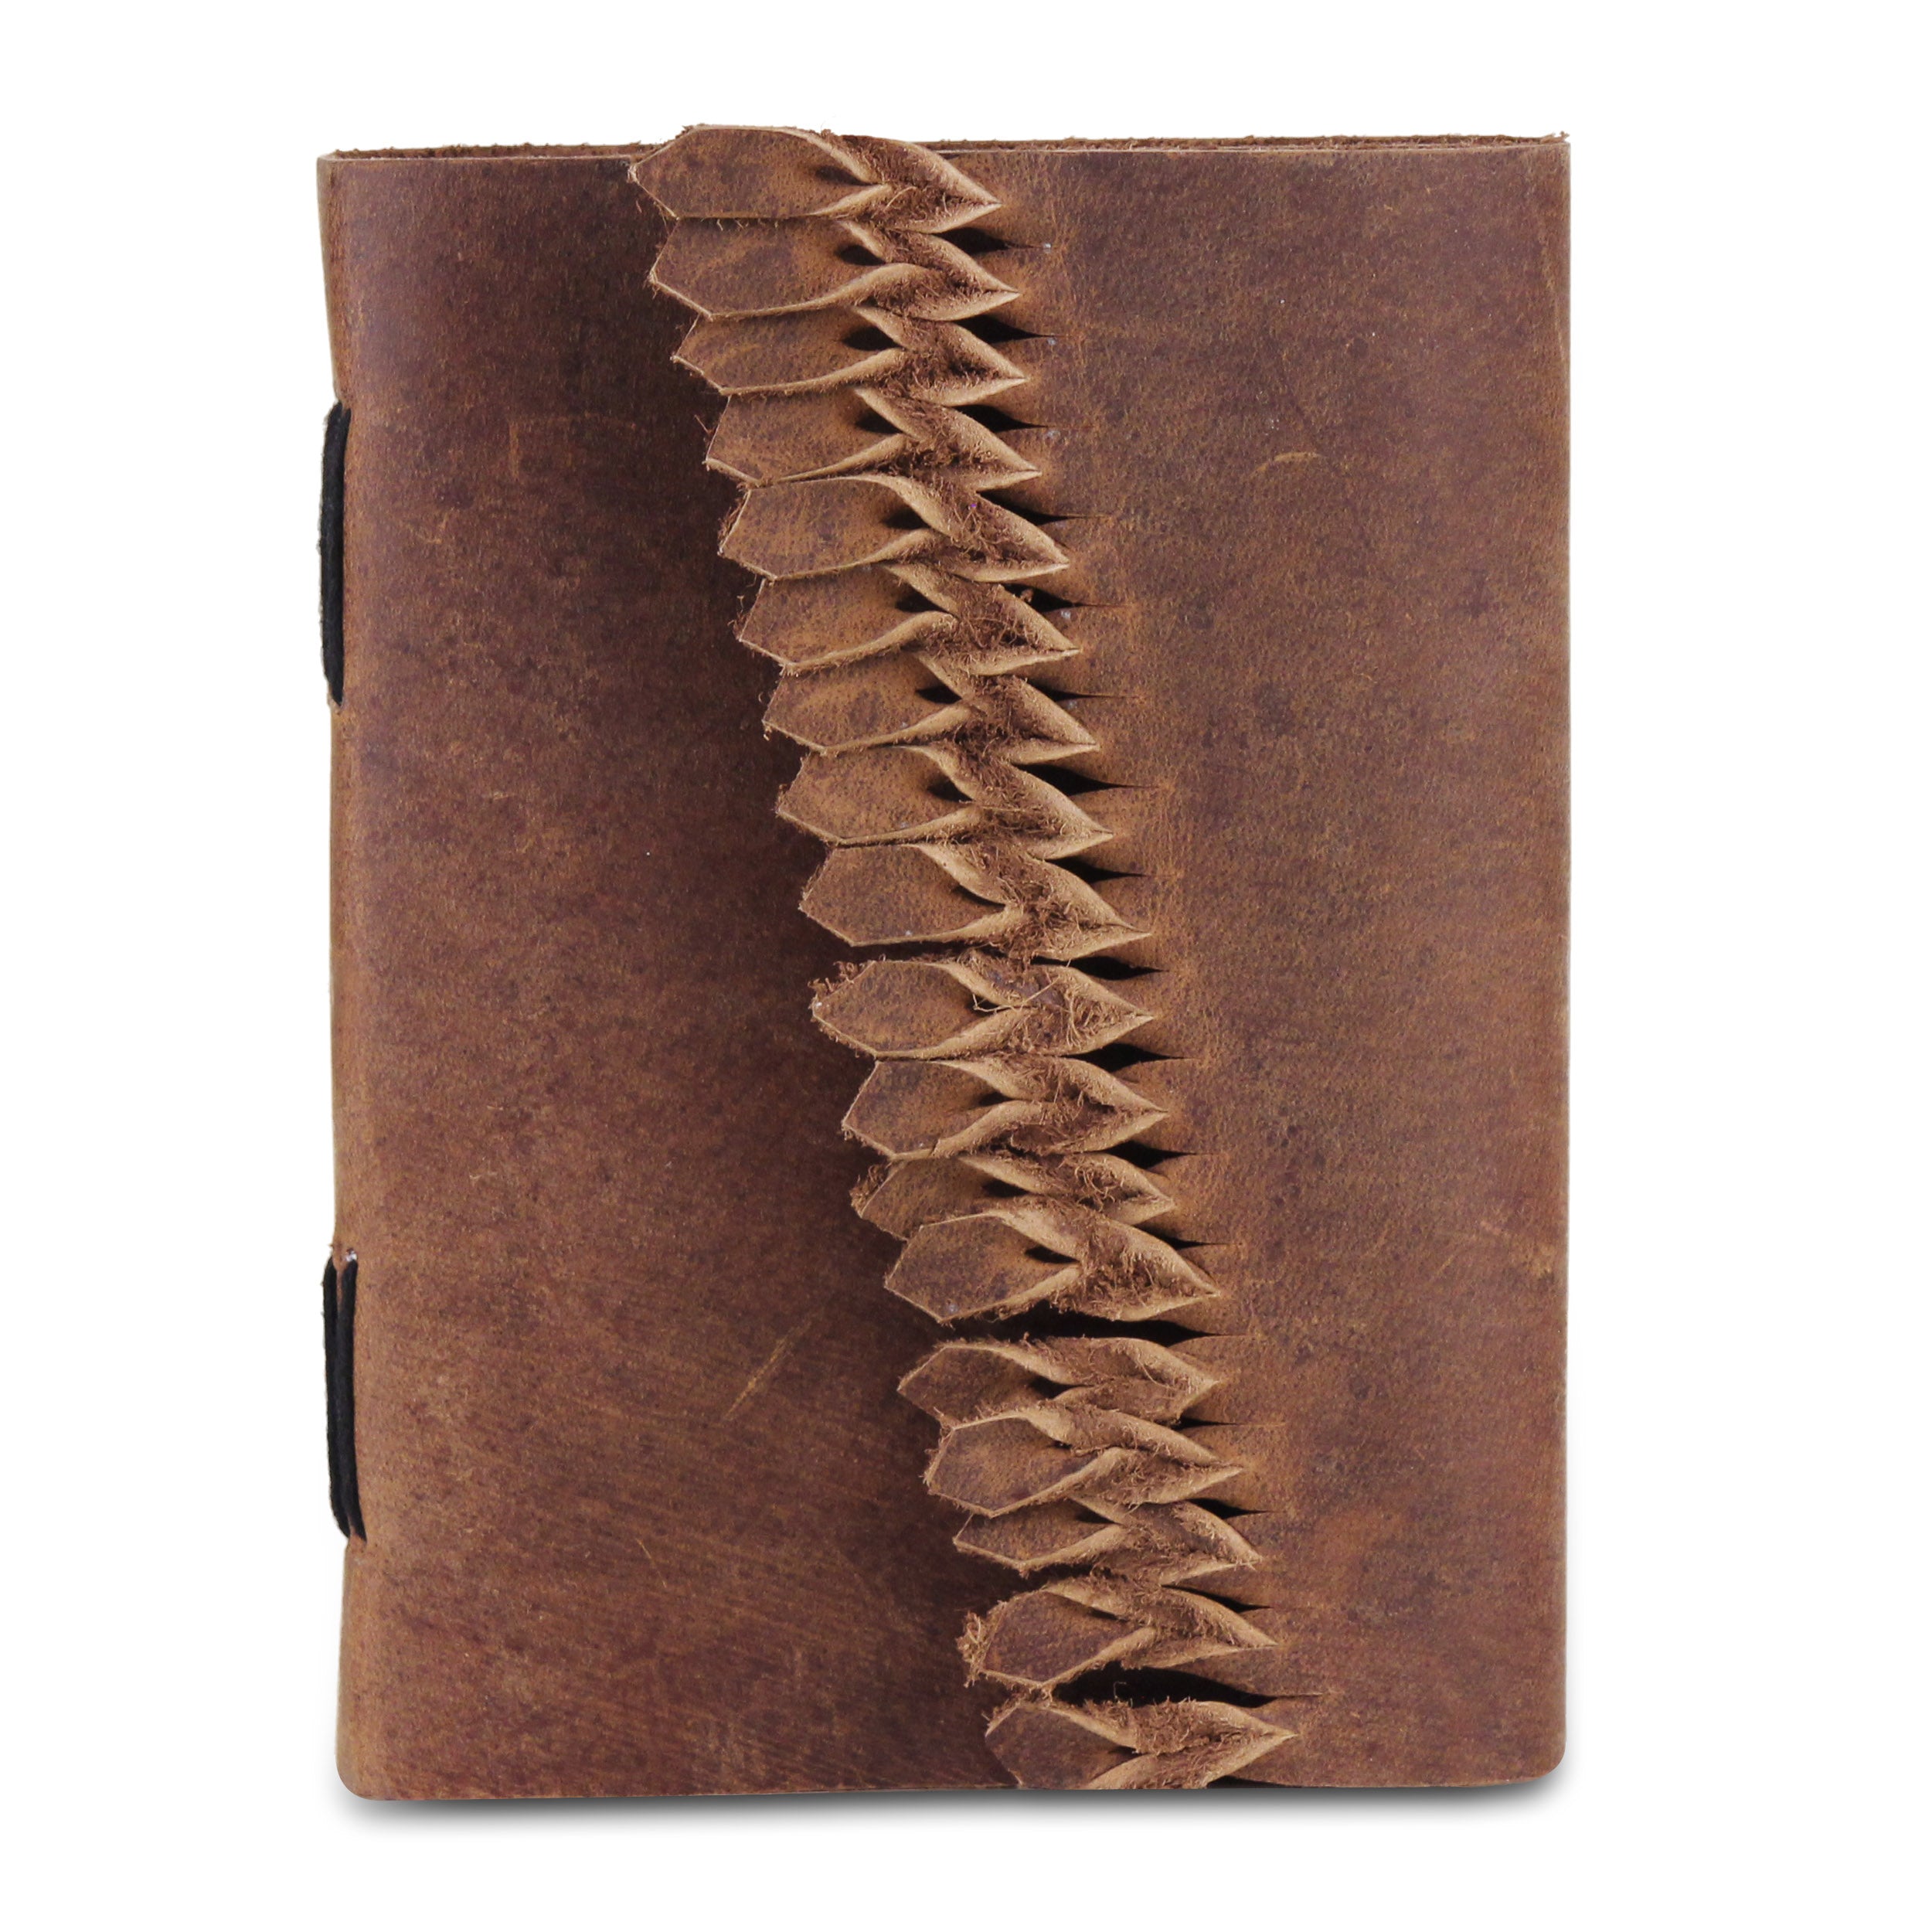 Full Grain Brown Leather Notebook Journal with Leather Frills